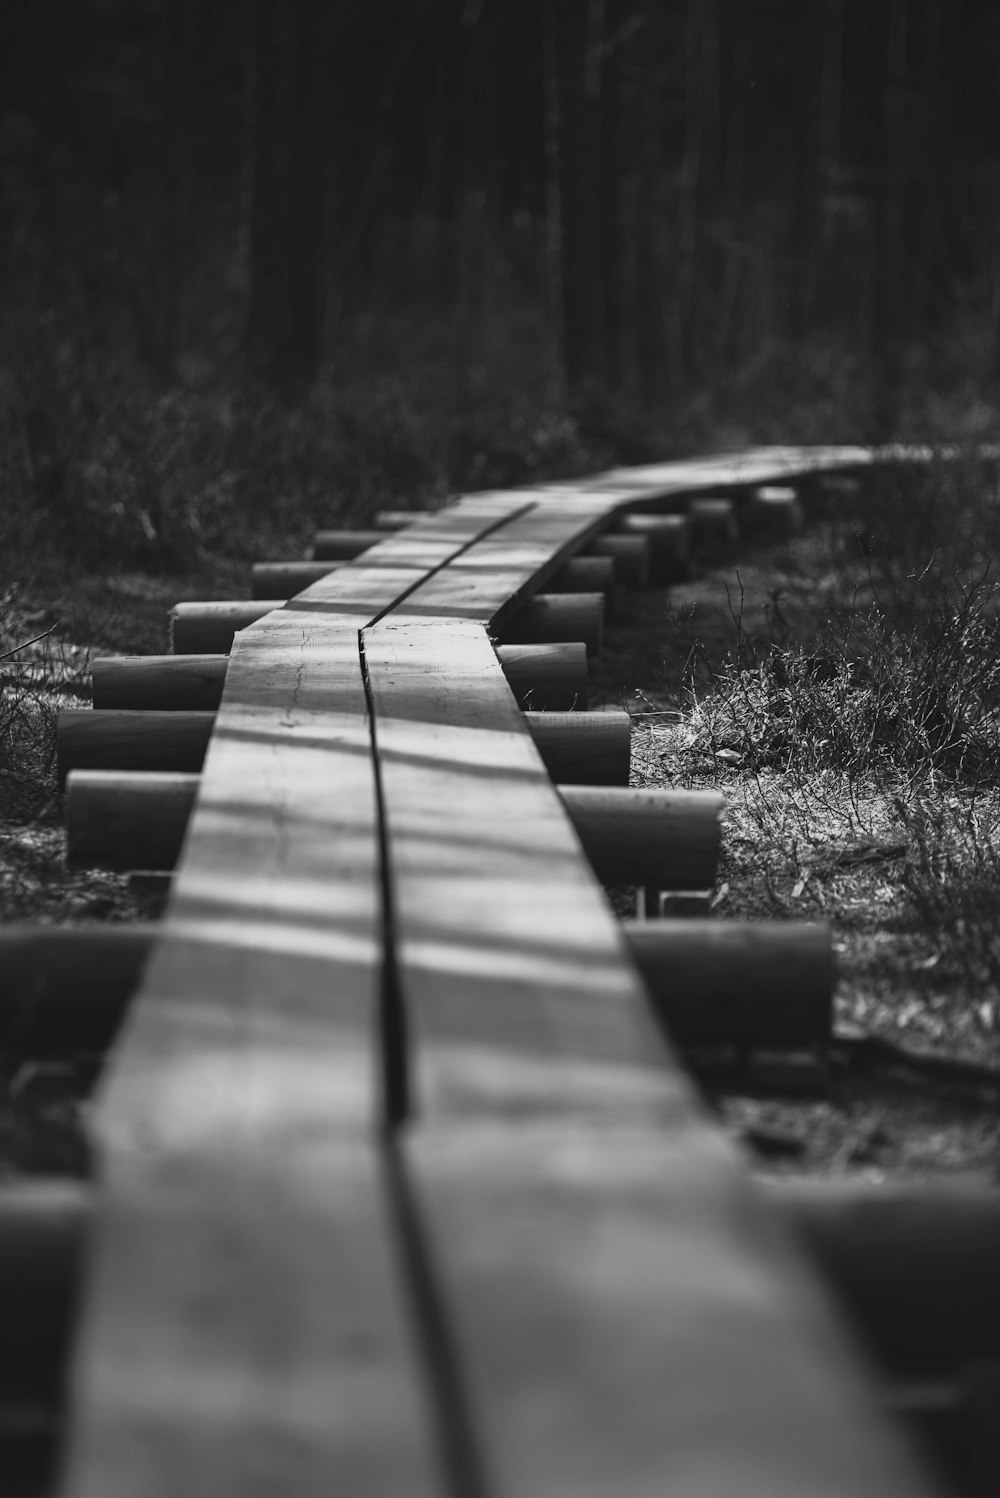 a black and white photo of a wooden walkway